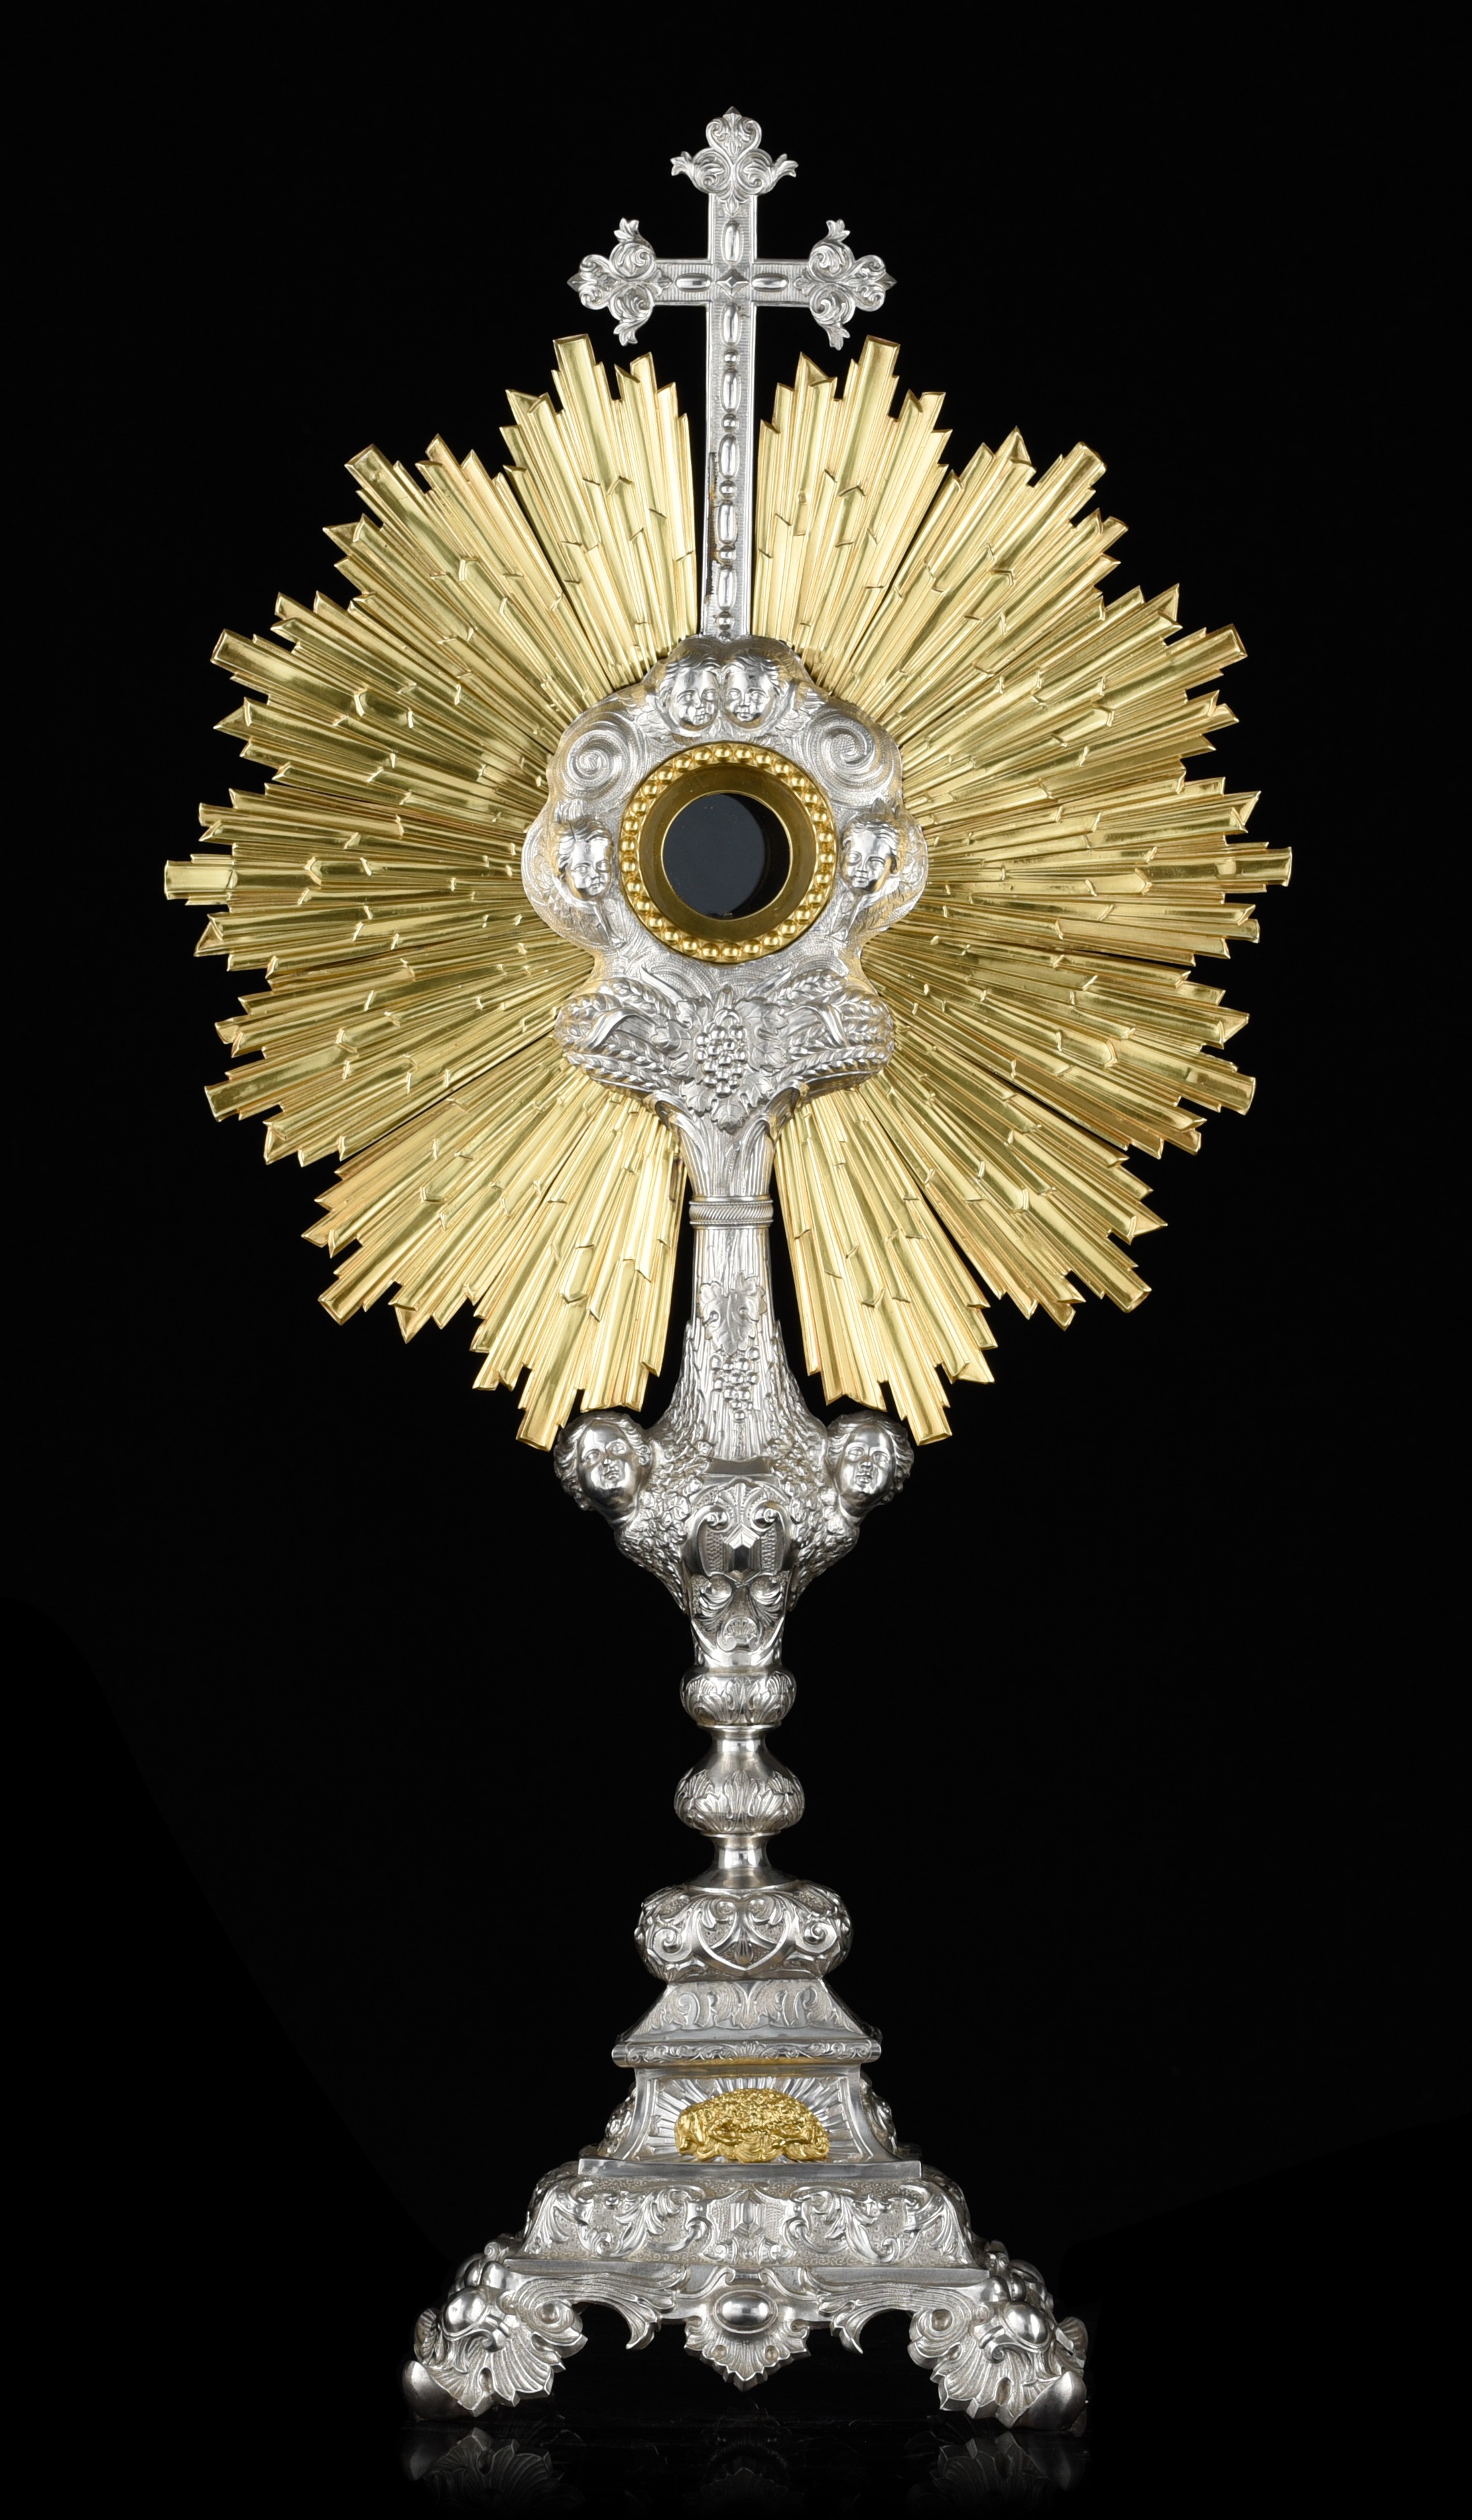 A French silver and gilt silver sunburst monstrance, 1838-1868, 950/000, H 71,5 cm - total weight: 1